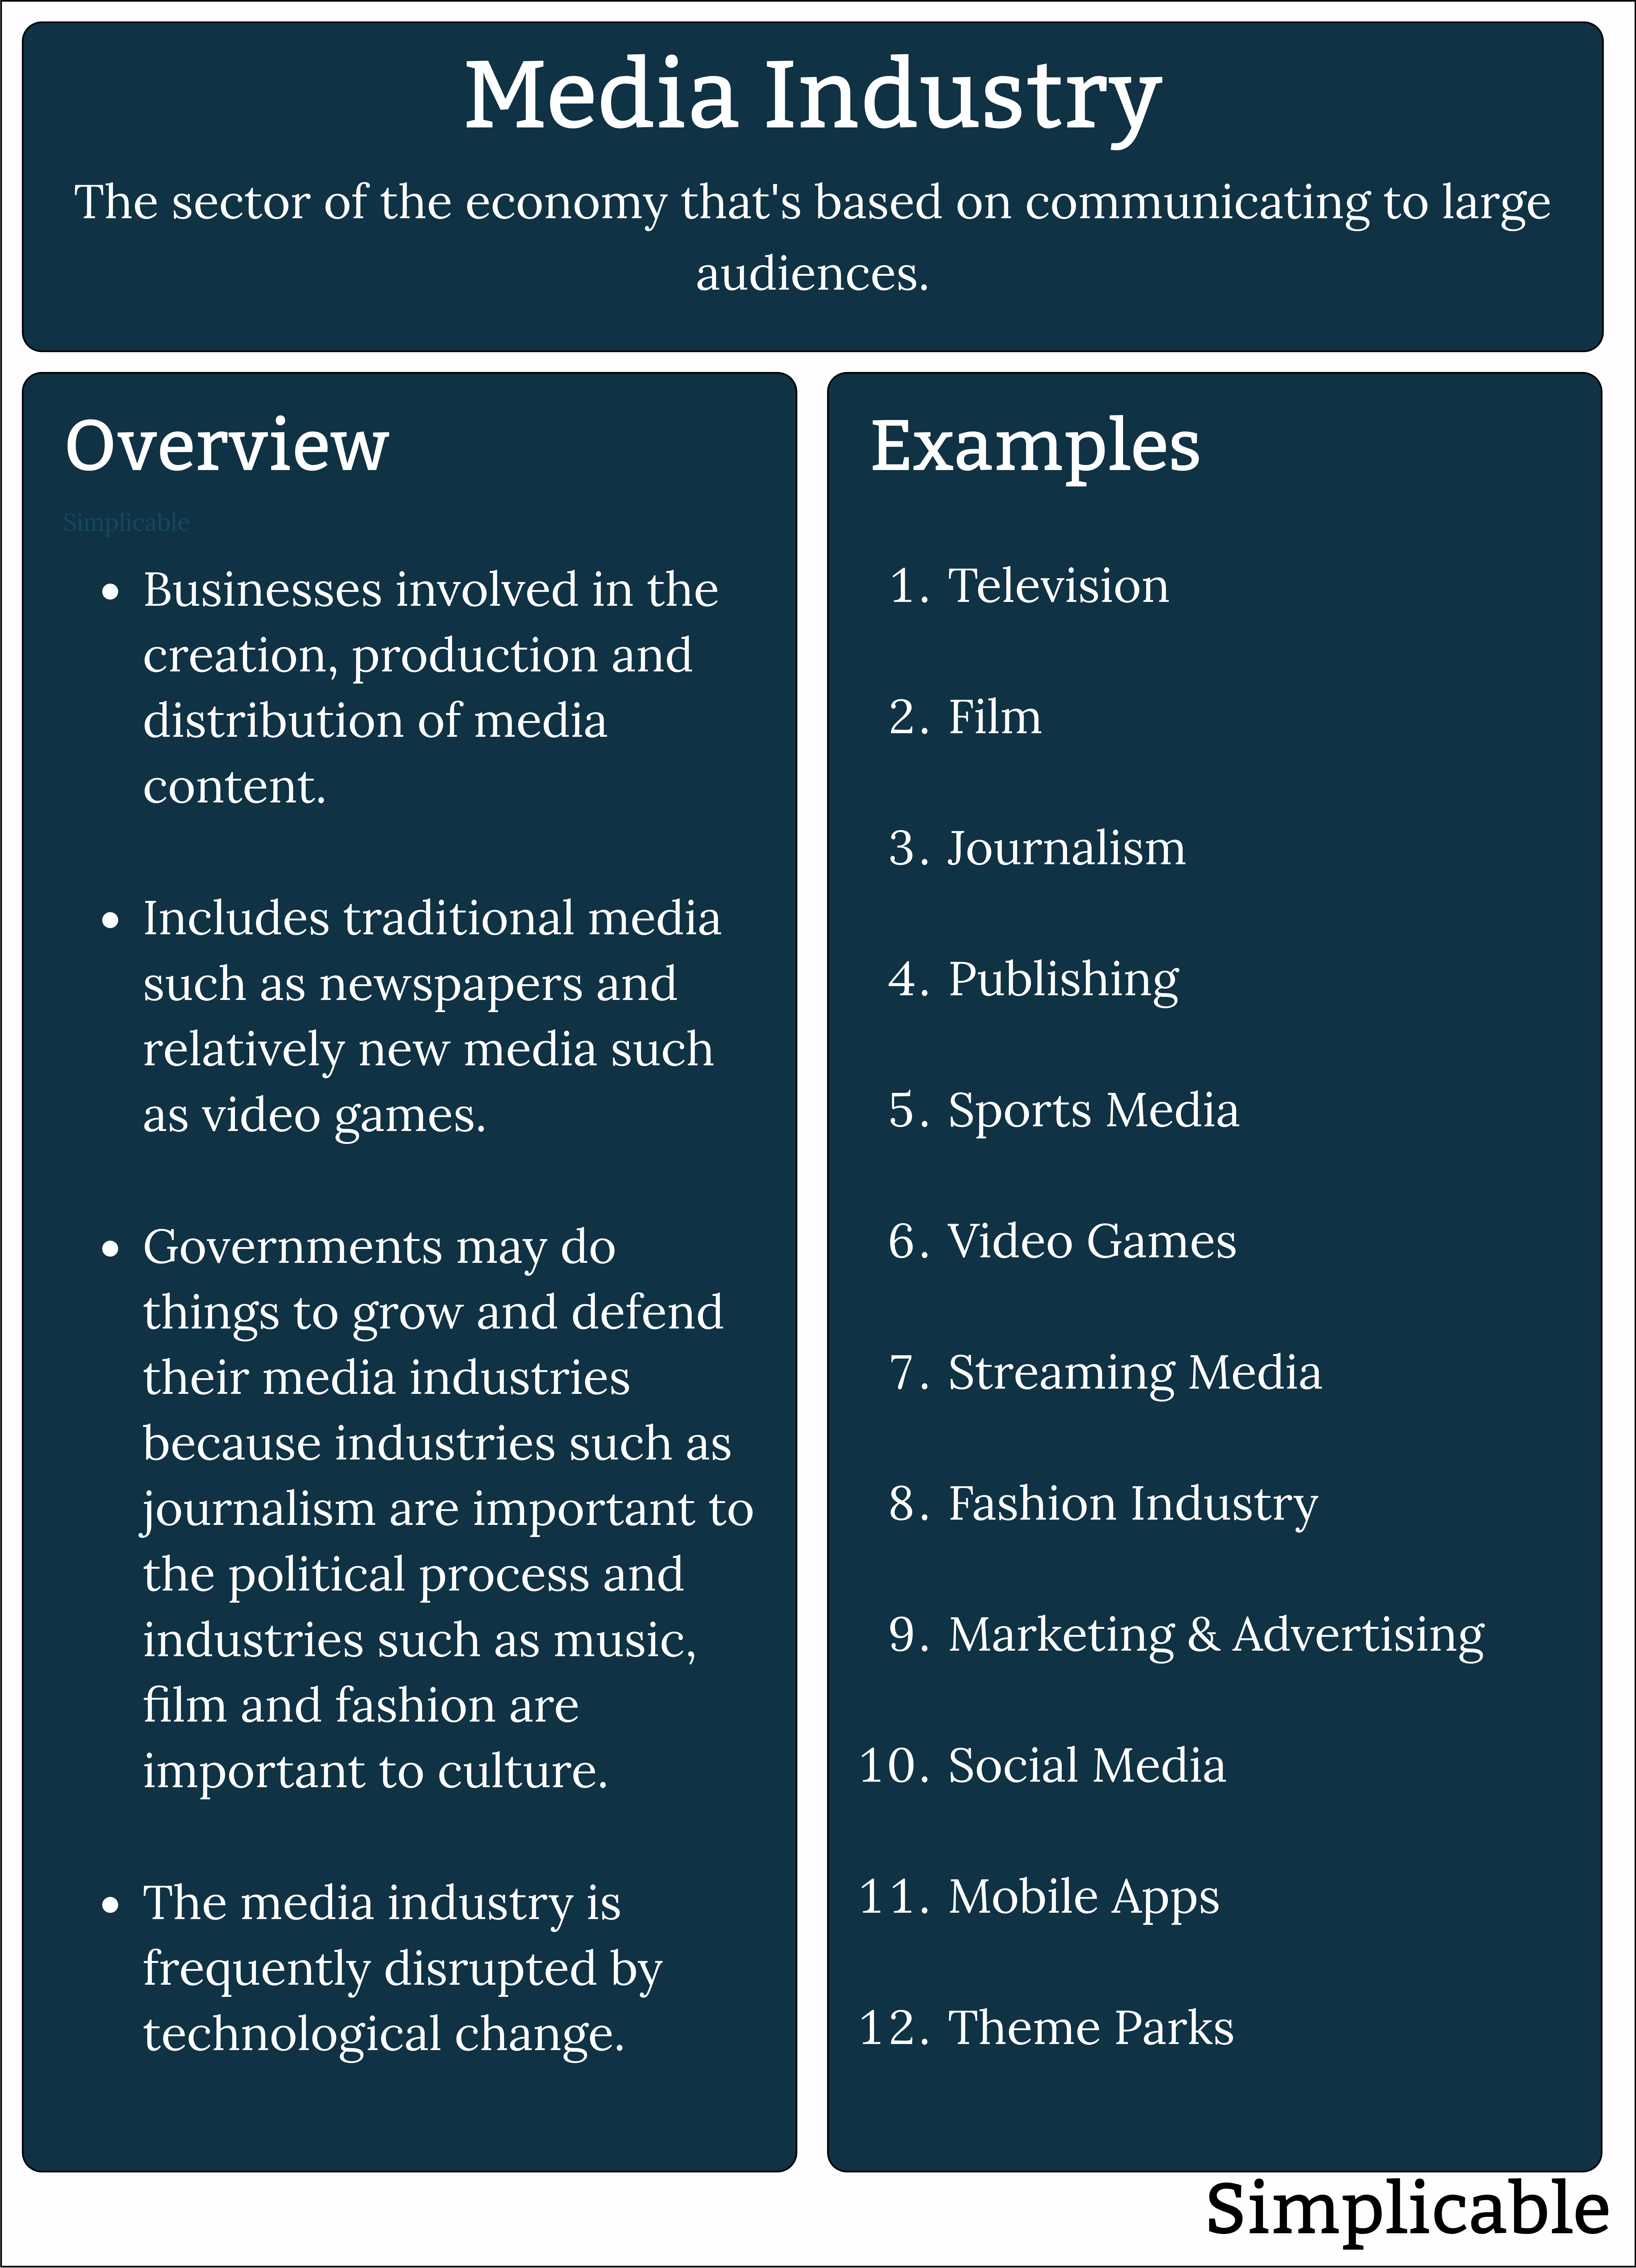 media industry overview and examples